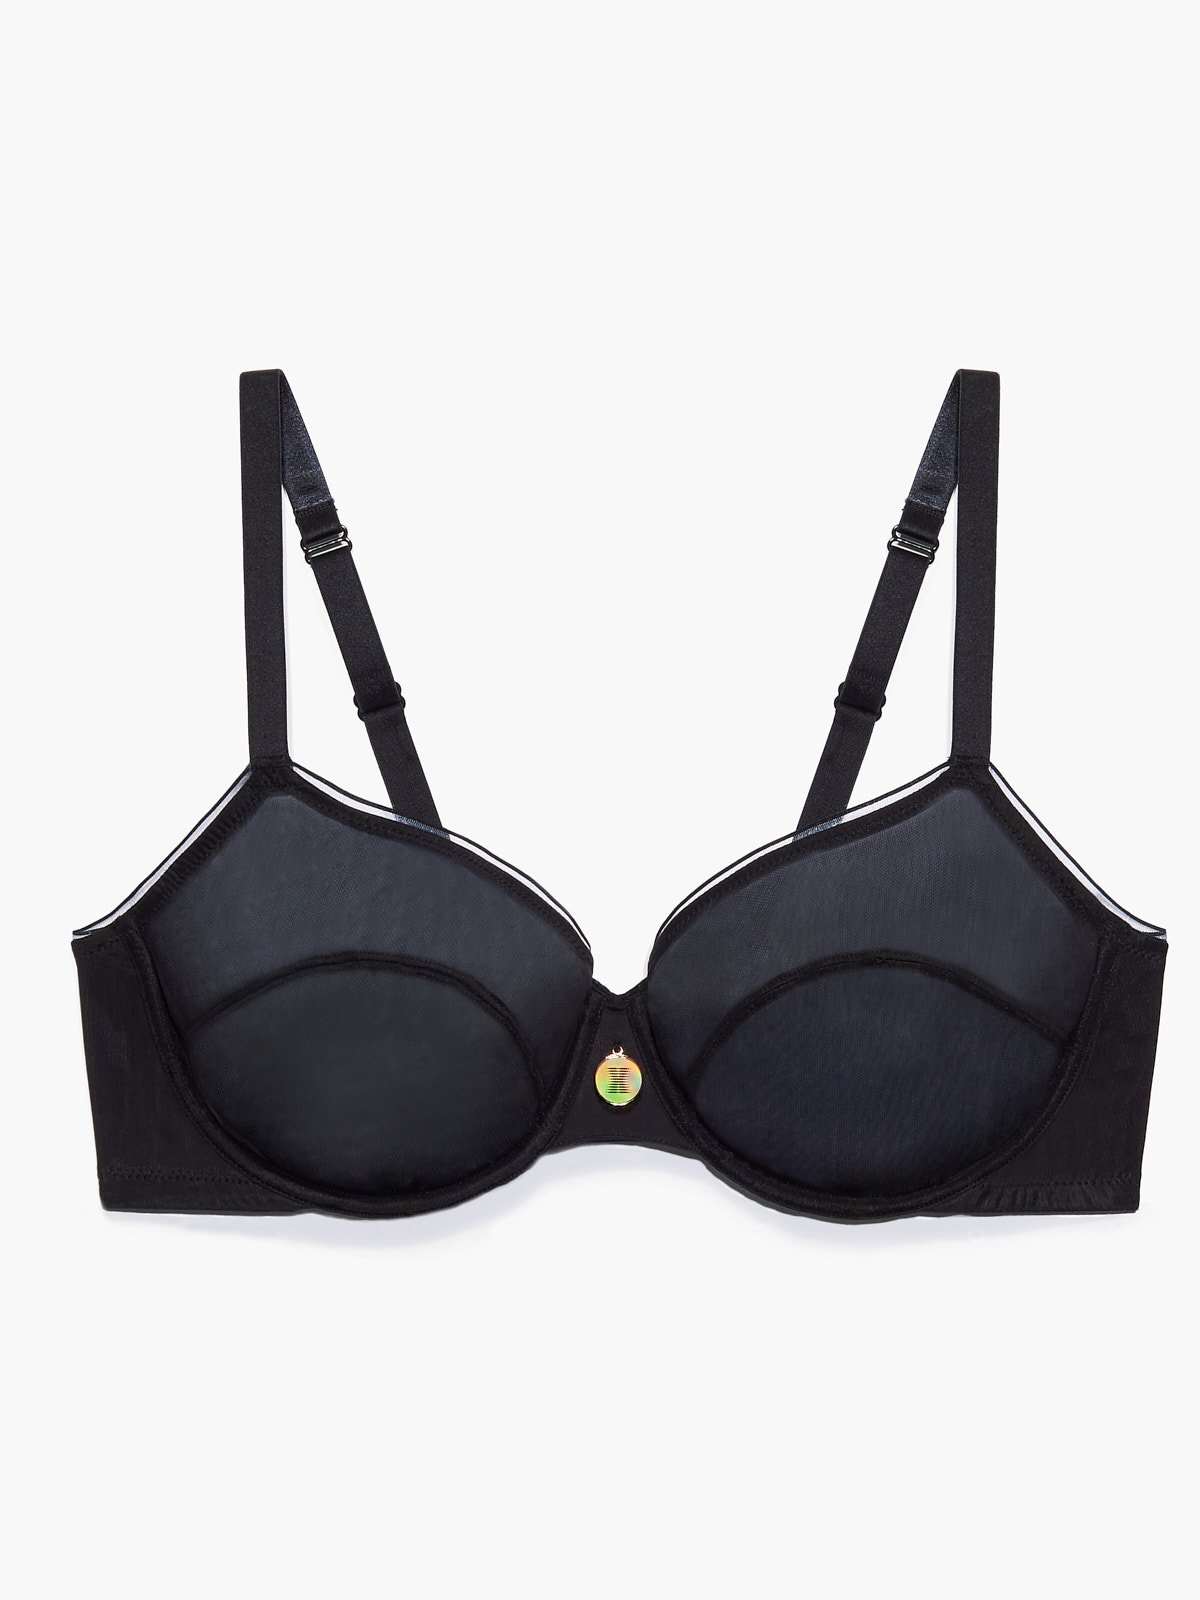 X-Ray Vision Half Cup Plunge Bra in Black